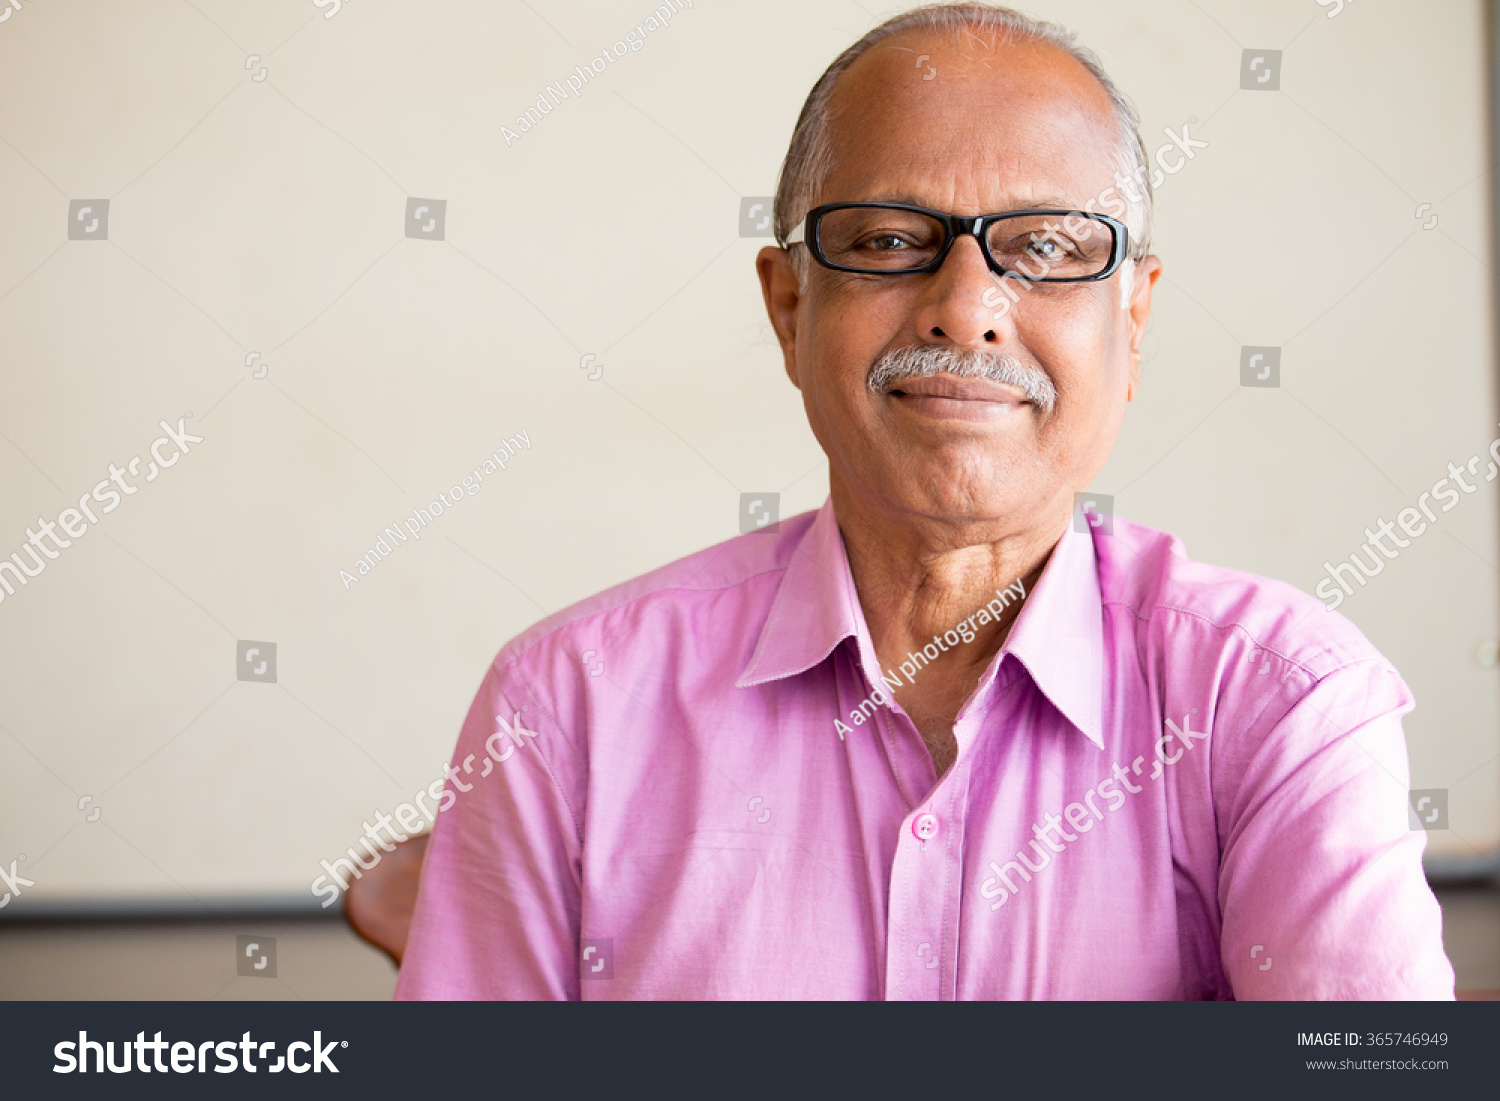 Closeup portrait, smart elderly man in pink shirt with dark eye glasses, specs, sitting down, isolated indoors white chalkboard background #365746949